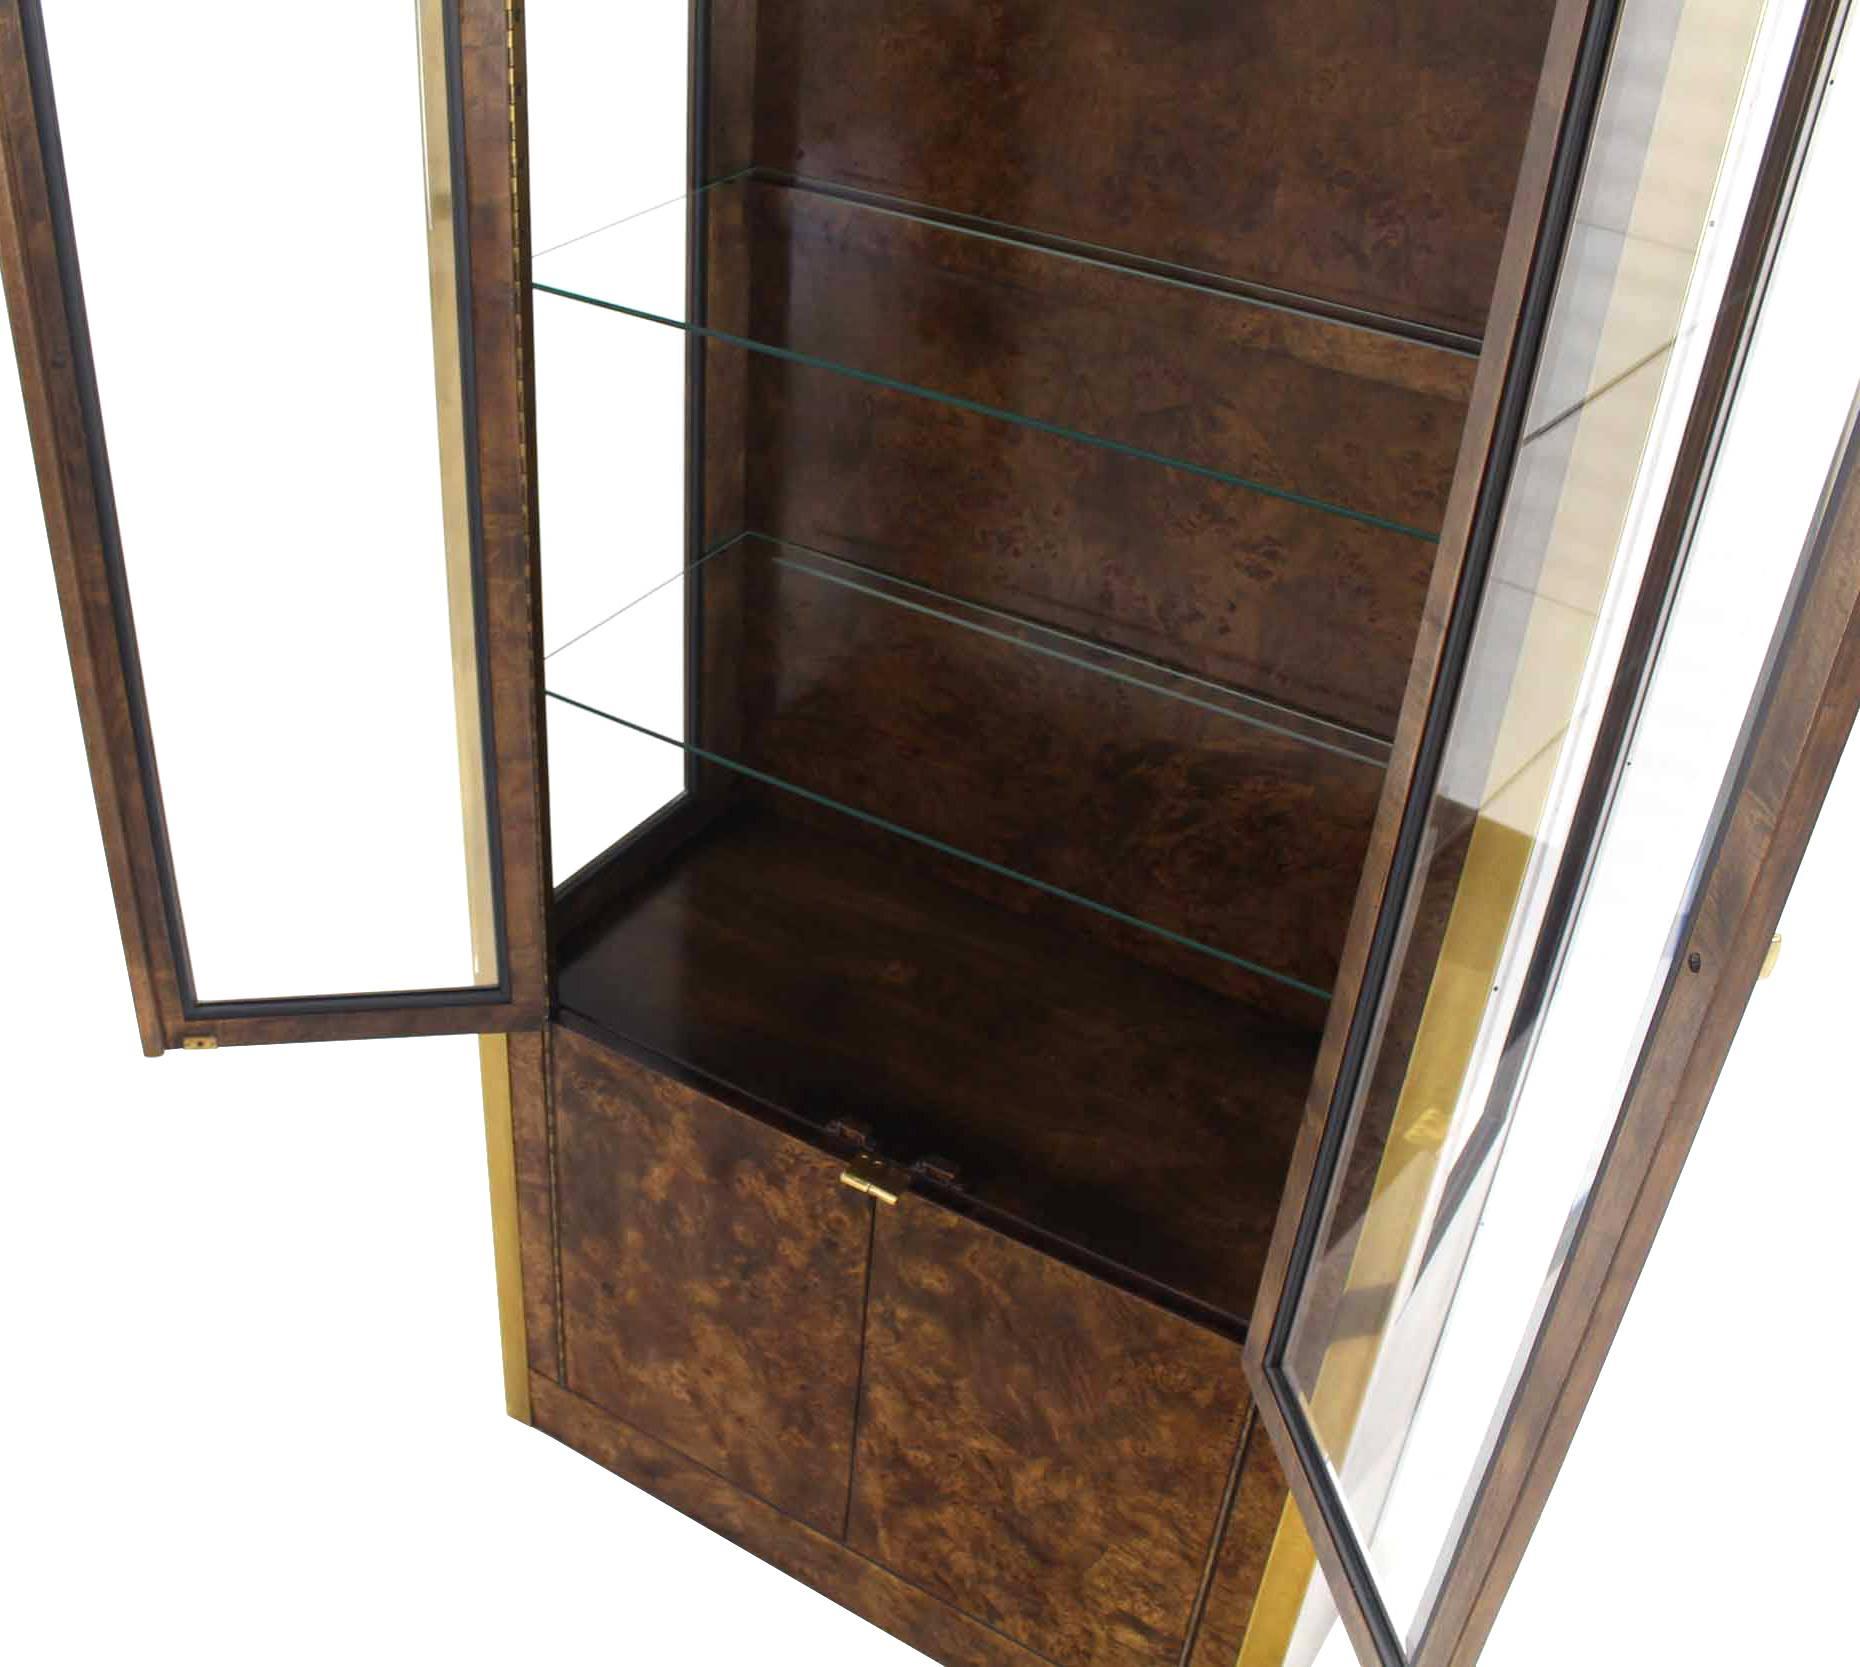 American Pair of Brass and Burl Wood Vitrine Display Cabinets